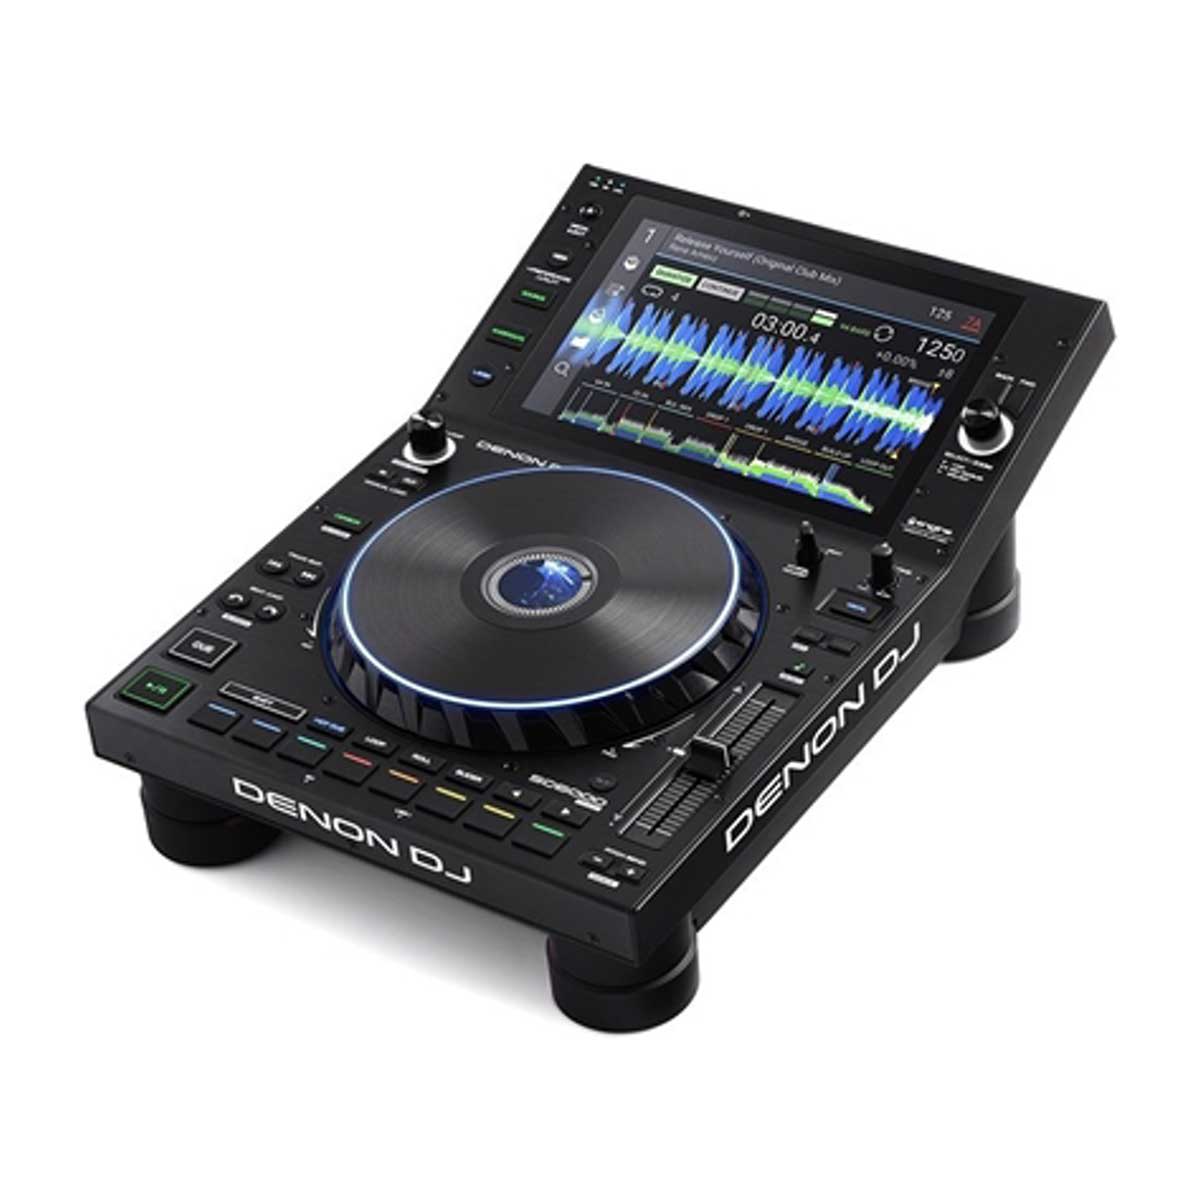 Denon SC6000 DJ Media Player with 10.1" Touch Screen